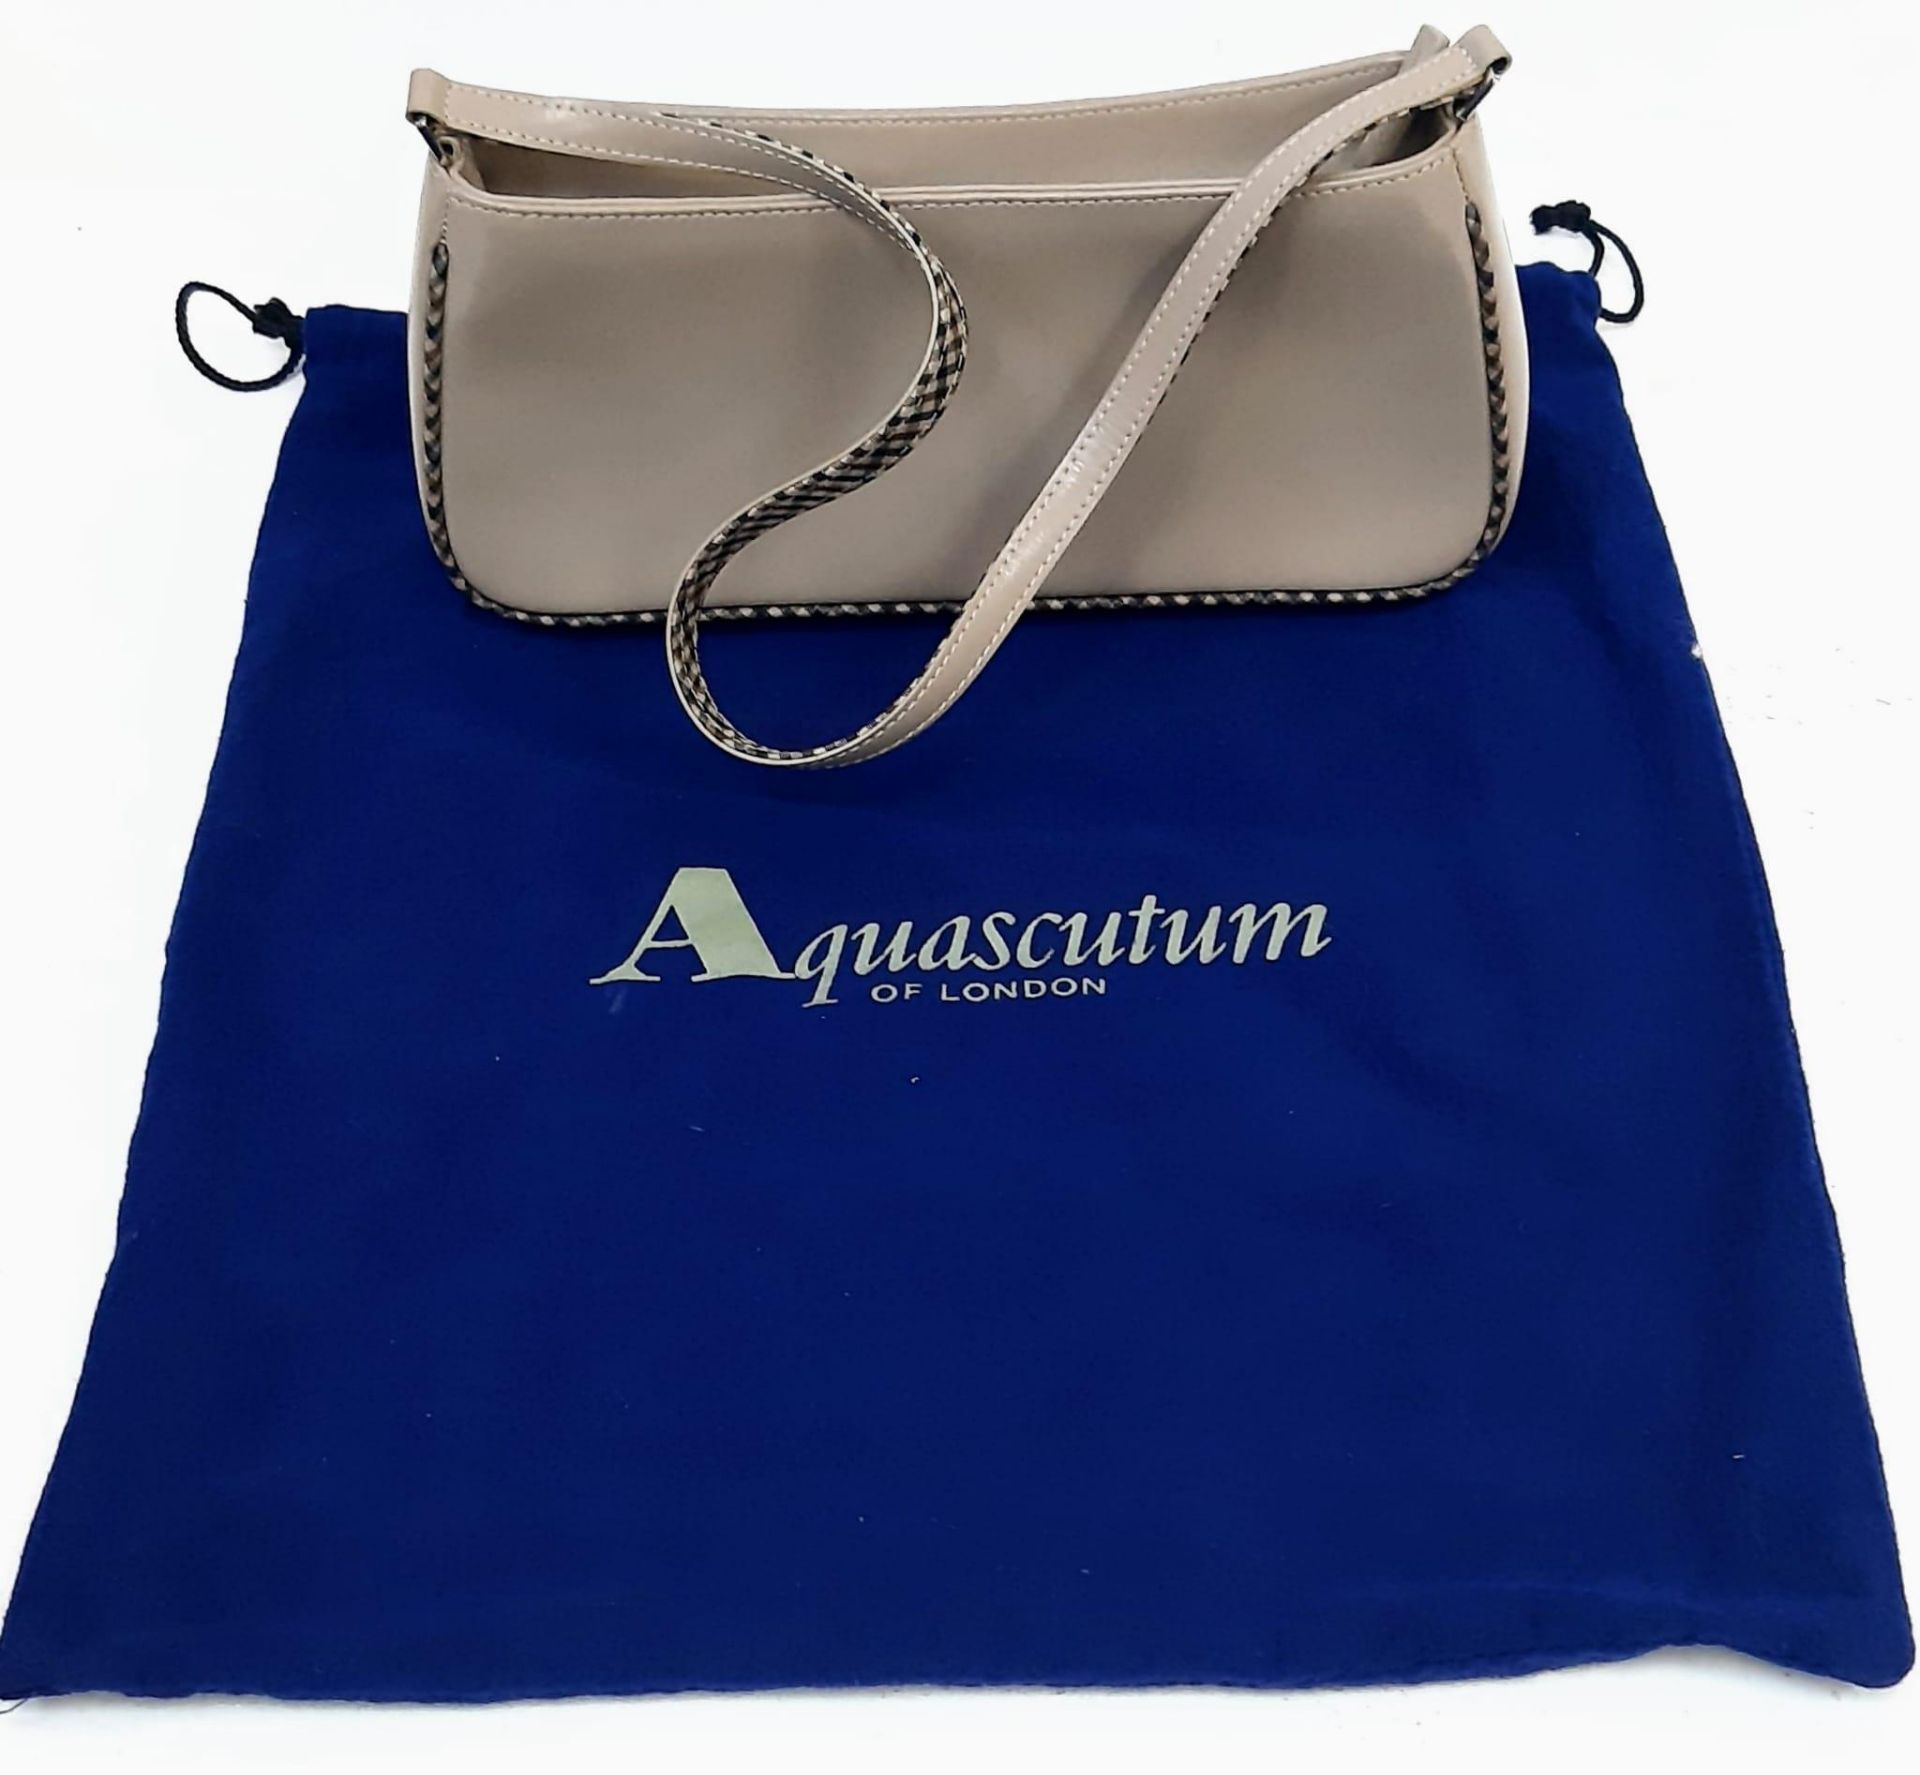 An Aquascutum Beige Leather Baguette Handbag with Dust-Cover. In good condition but pleases see